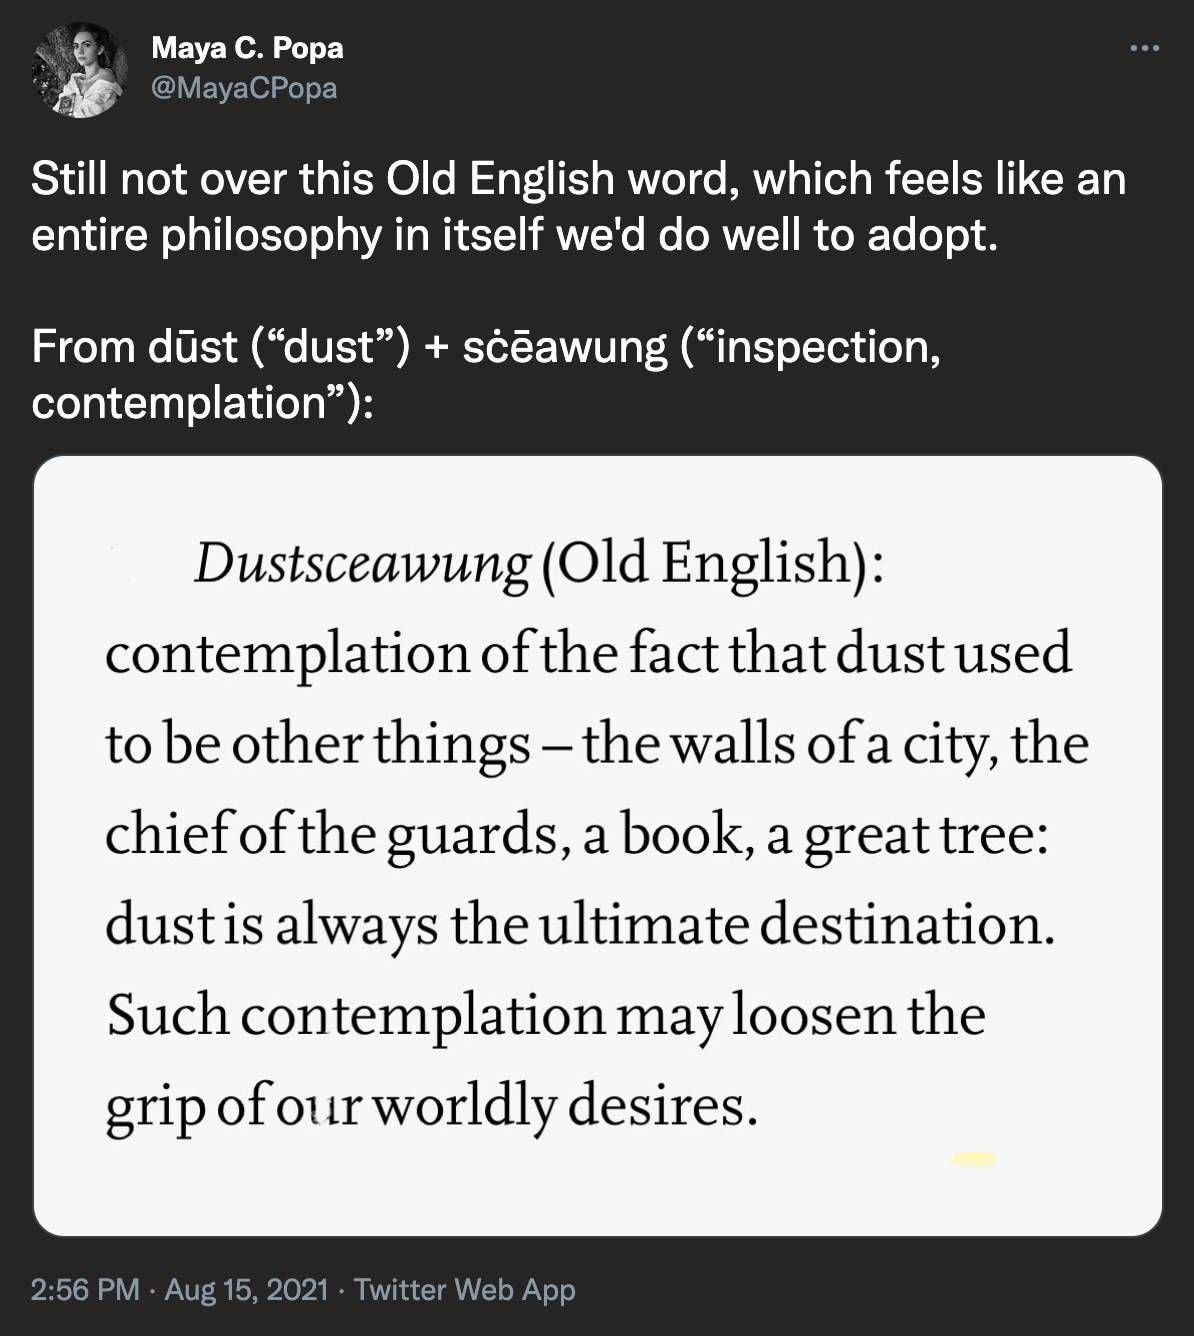 @MayaCPopa on Twitter: Still not over this Old English word, which feels like an entire philosophy in itself we'd do well to adopt. Dustsceawung (Old English): contemplation of the fact that dust used to be other things - the walls of a city, the chief of the guards, a book, a great tree: dust is always the ultimate destination. Such contemplation may loosen the grip of our worldly desires.